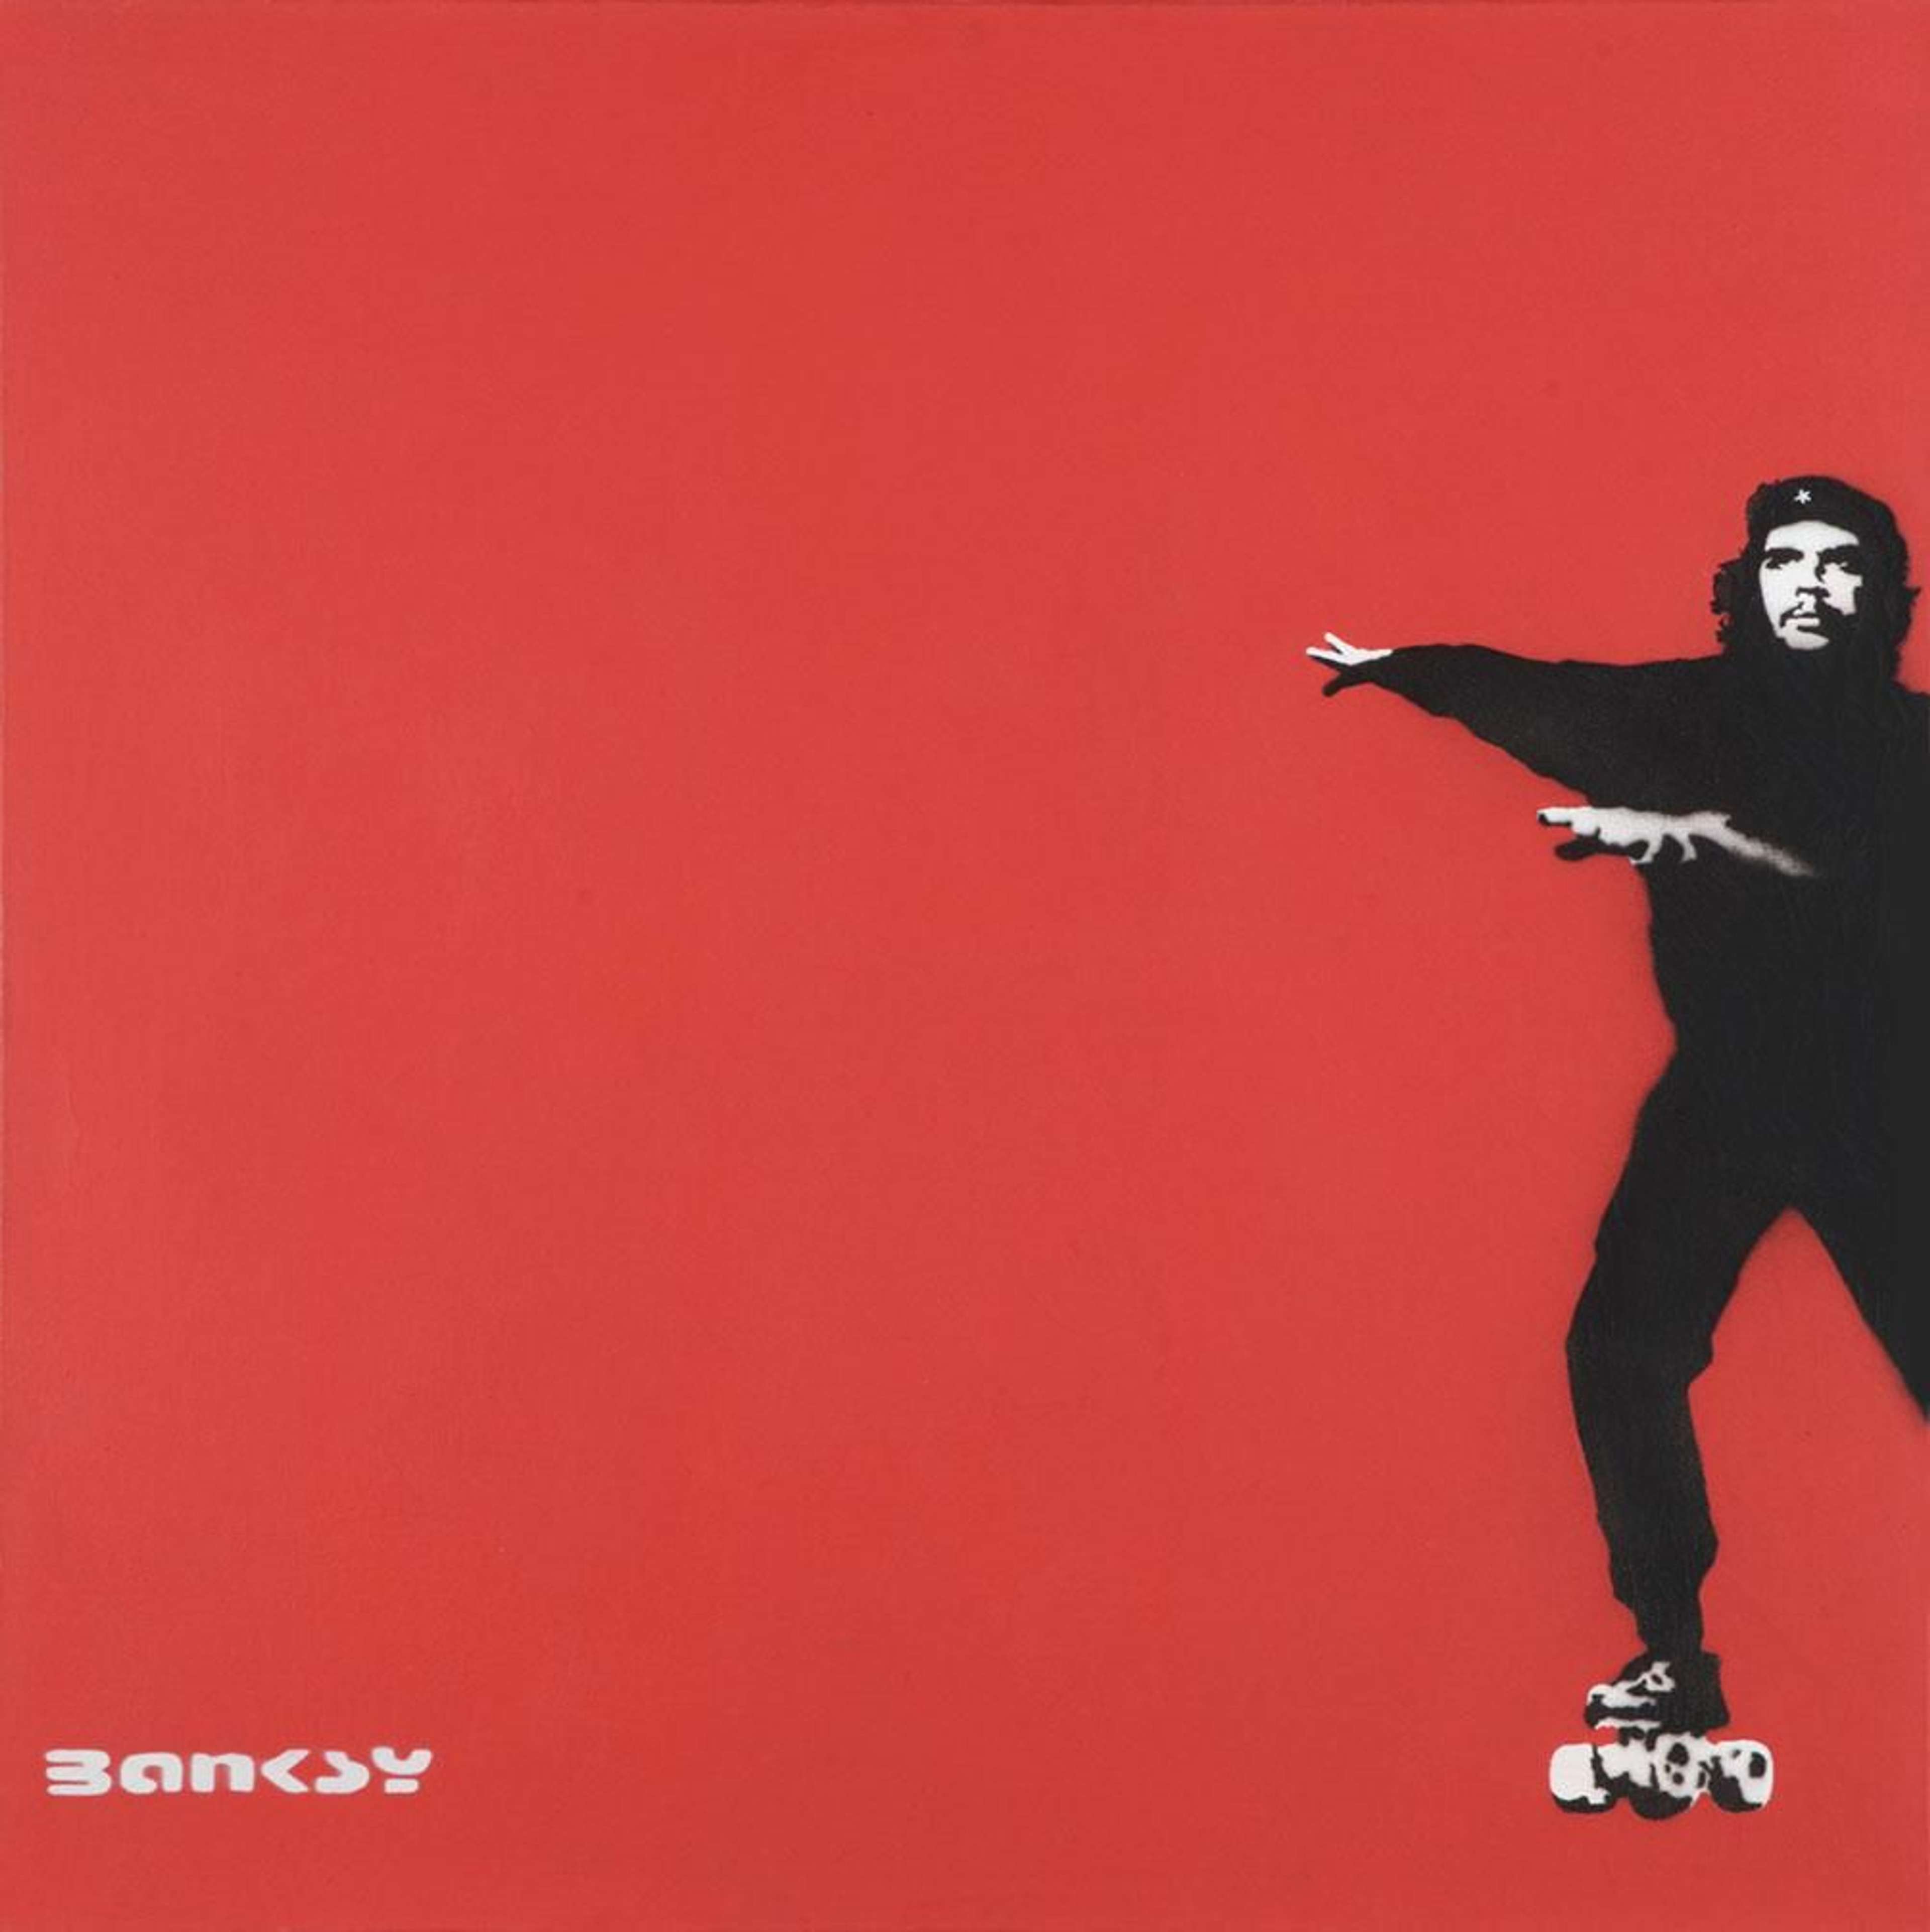 Banksy's Che Guevara On Skates. A spray paint work of man on roller skates against a red background.